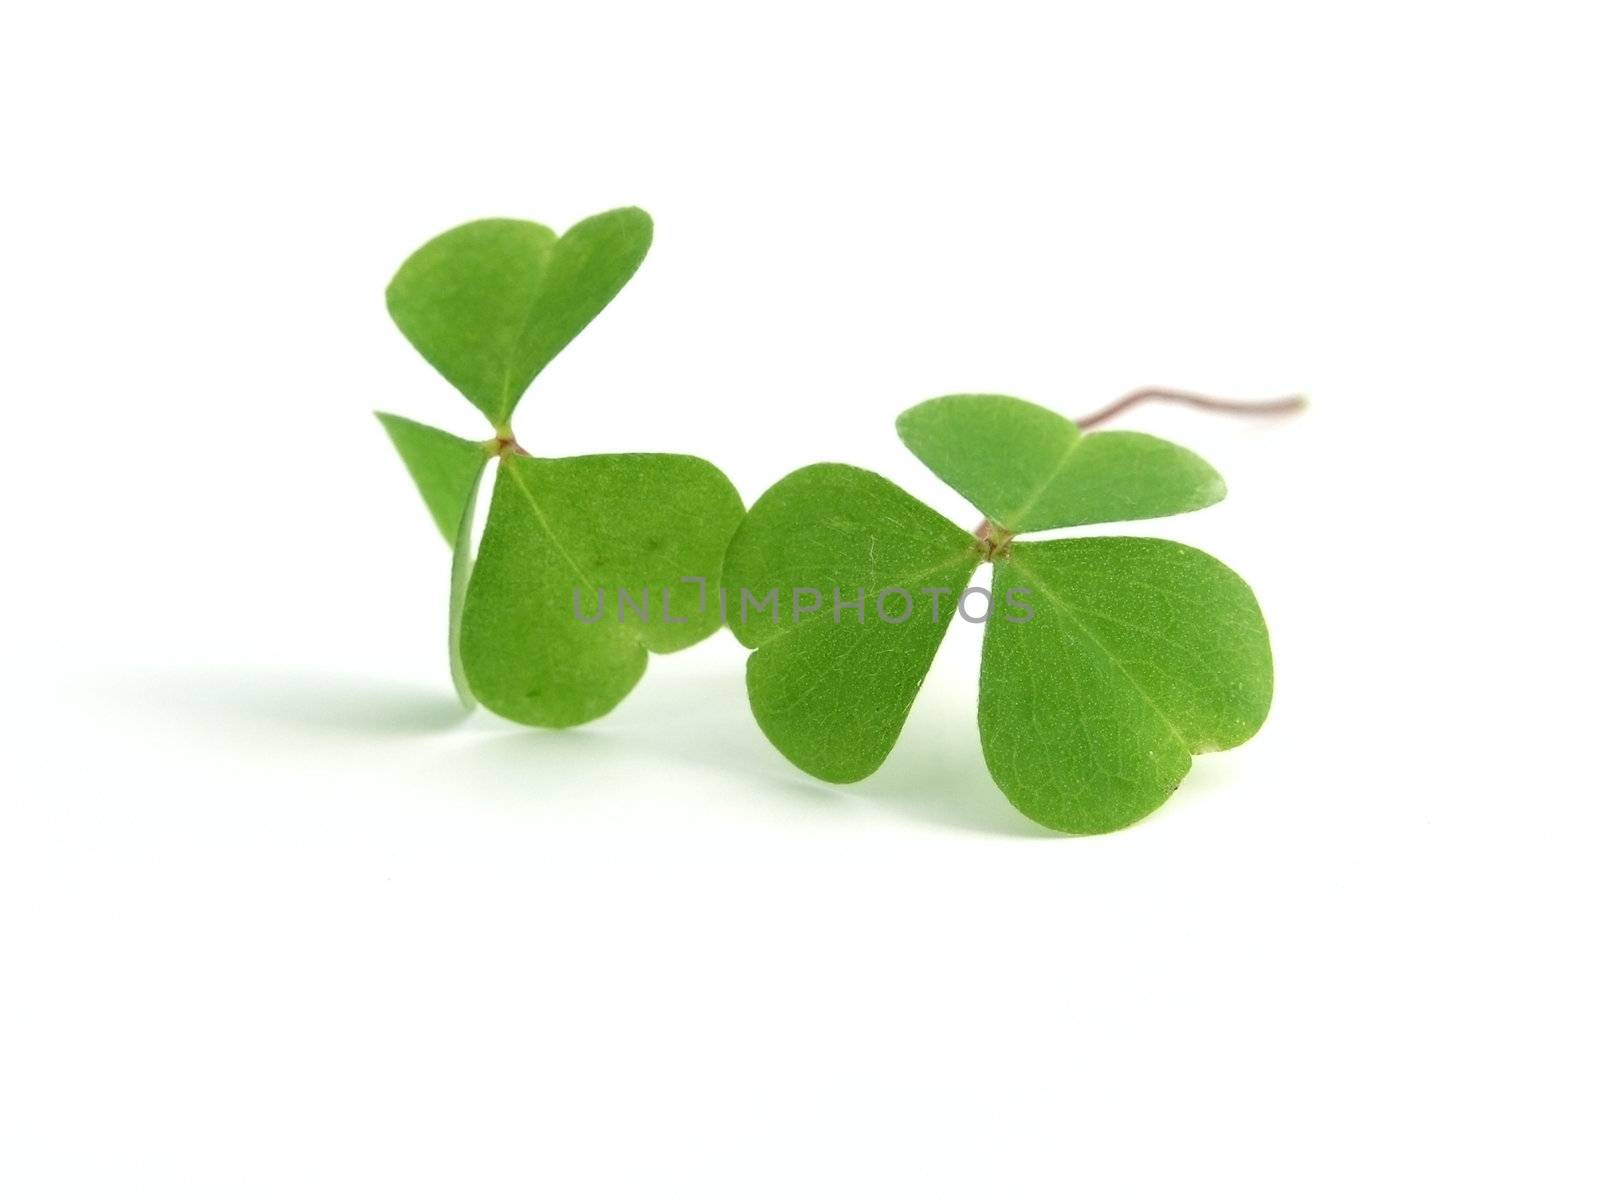 fresh, green clover isolated on white background